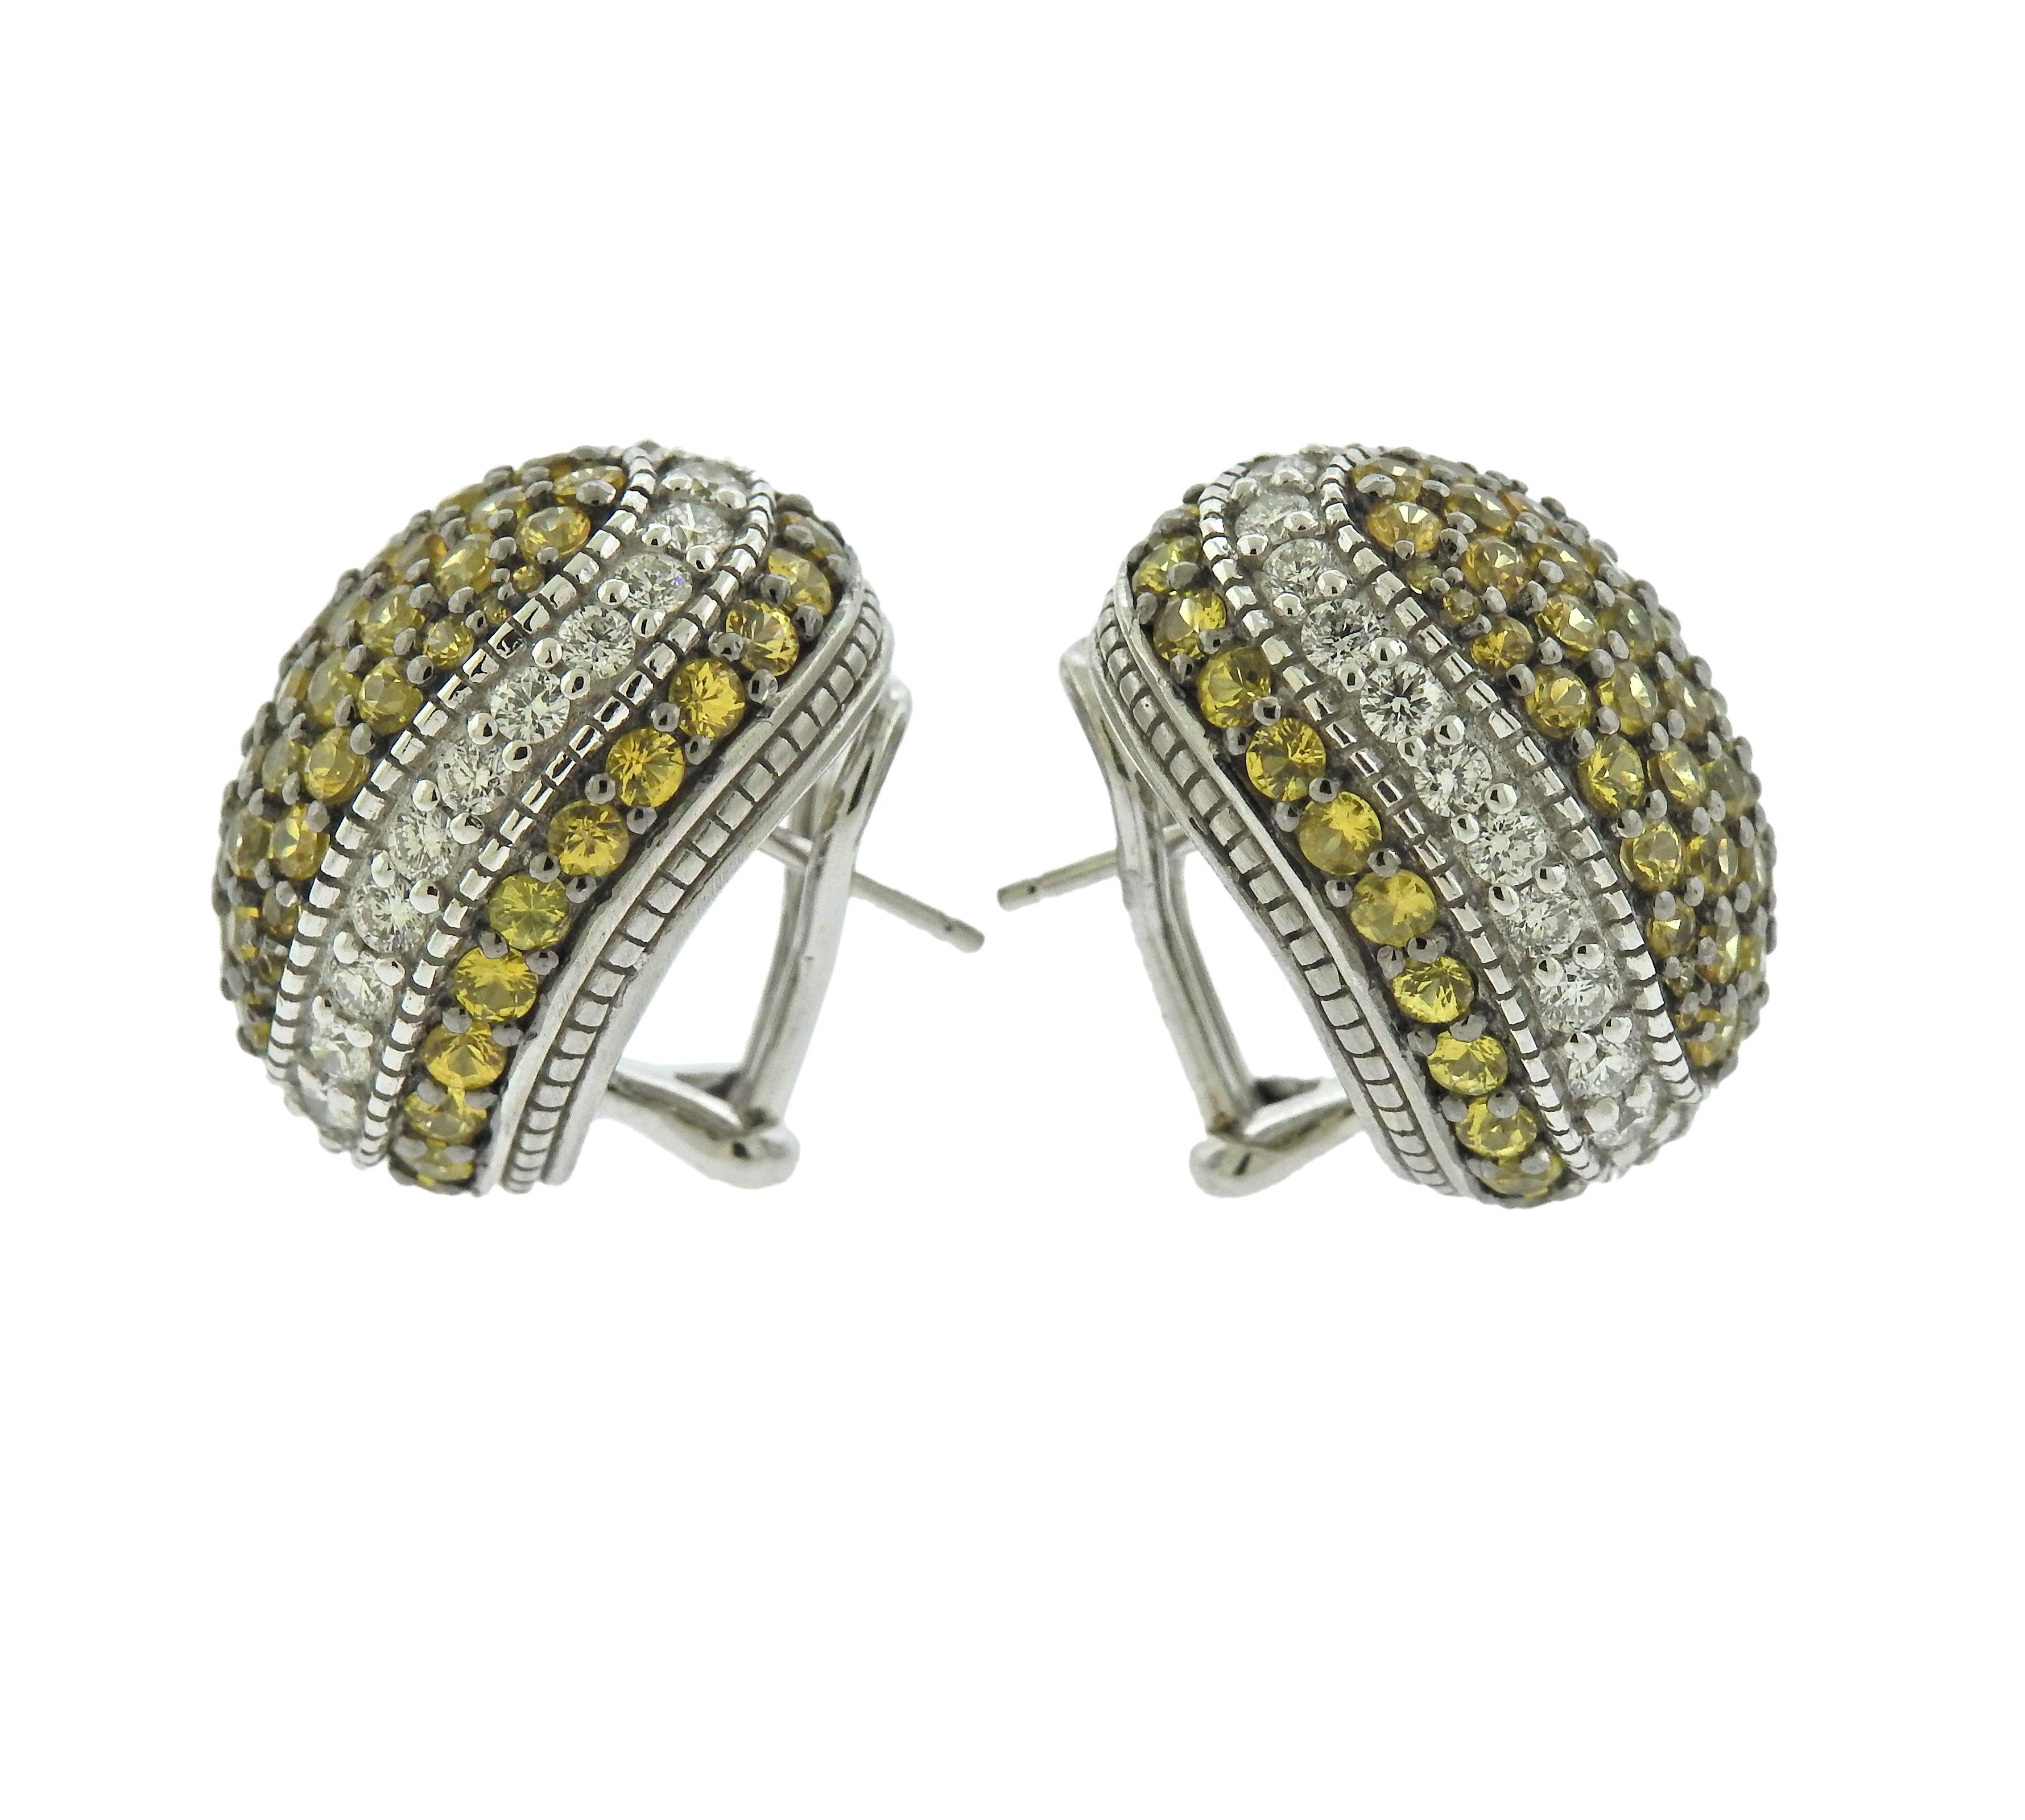 Splendid Judith Ripka 18K gold earrings featuring lemon citrine and approximately 1.45ctw of diamonds. Earrings measure 21mm X 16mm and weigh 21.3 grams. Marked JR and 18k. 